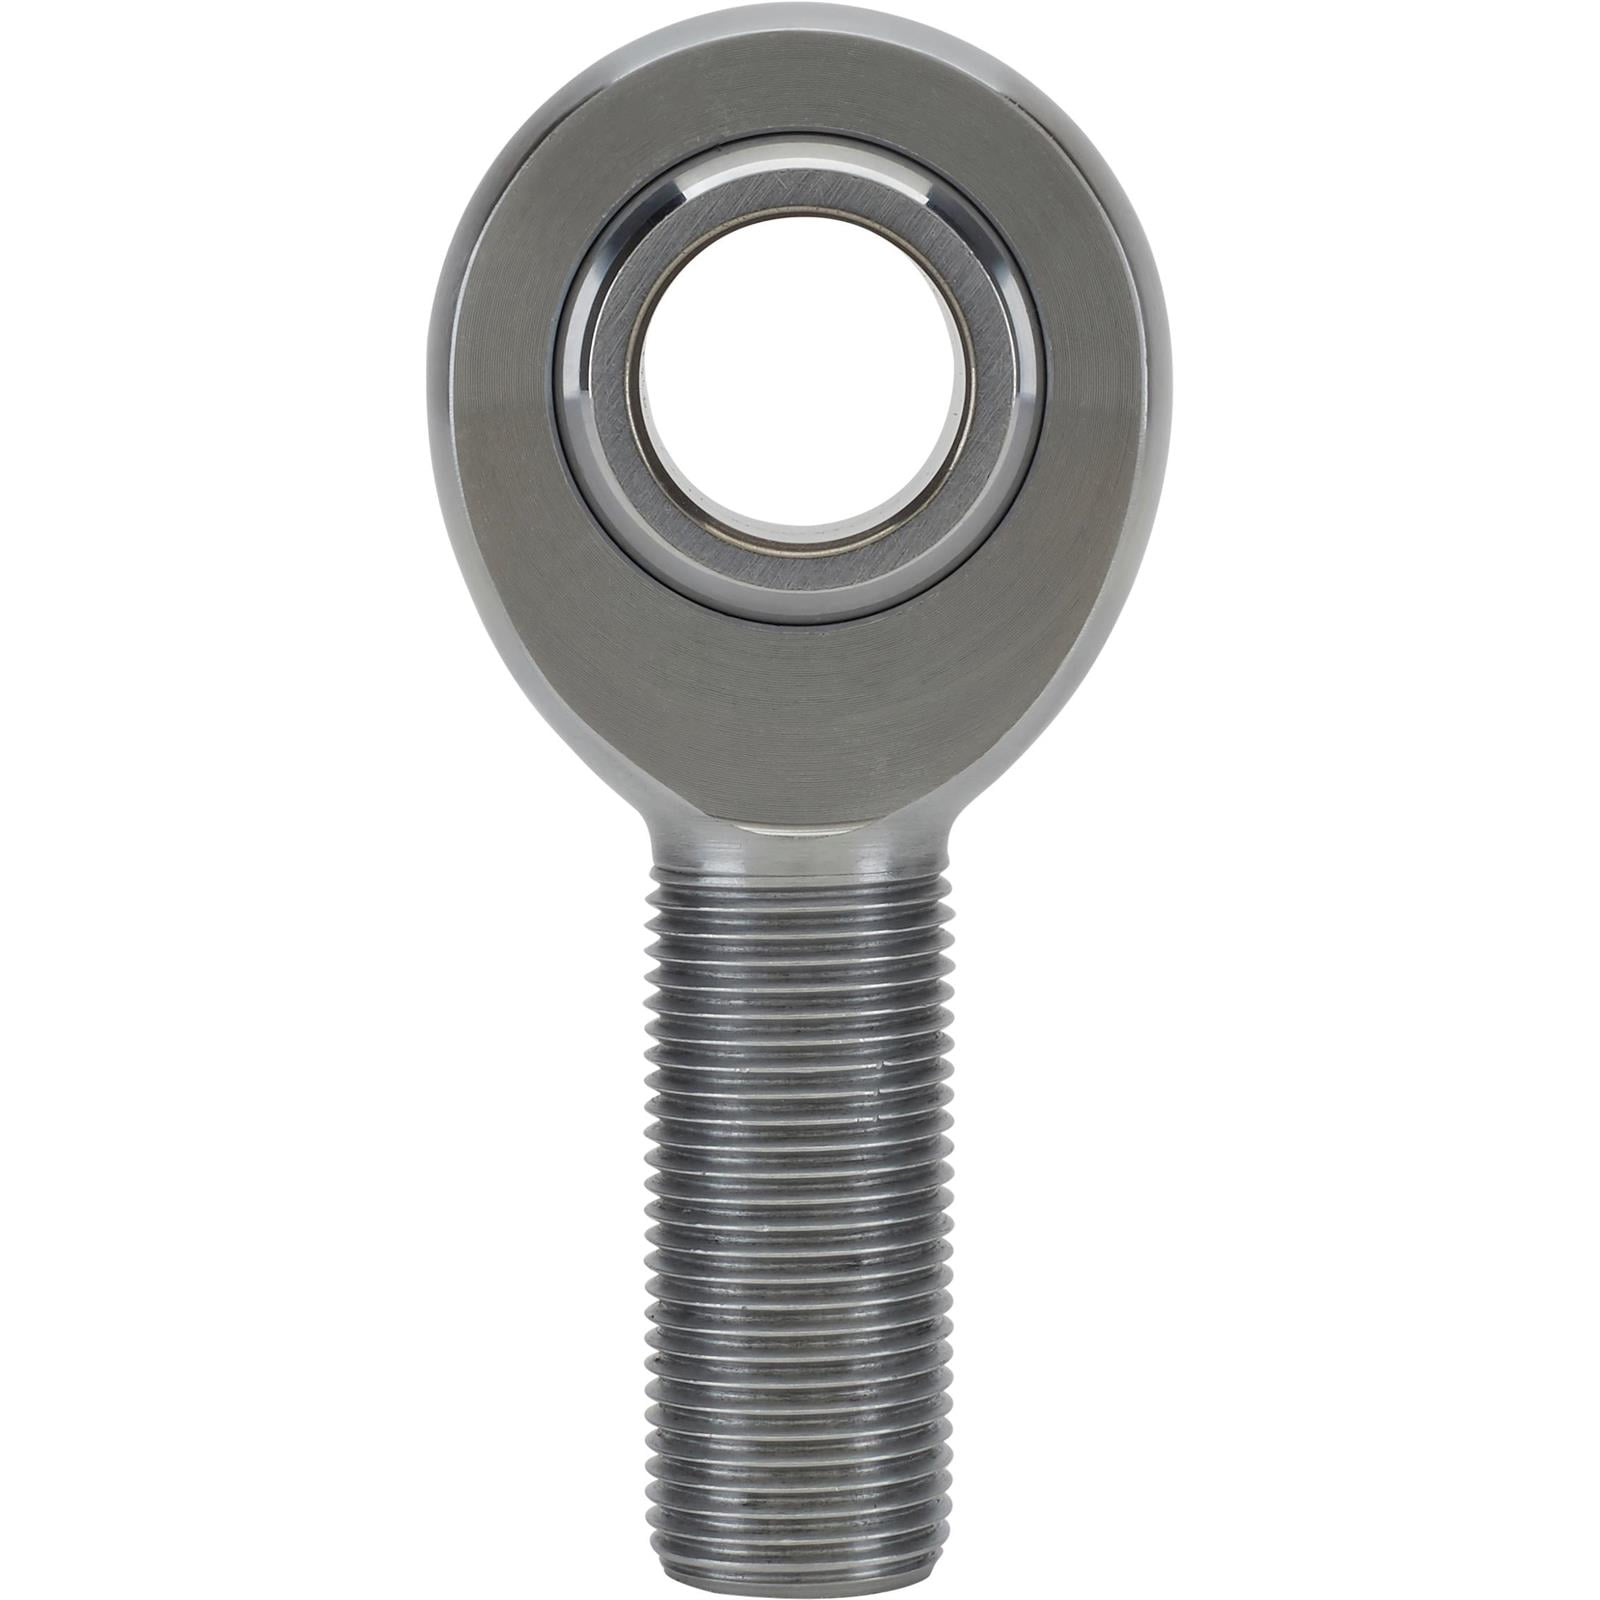 Precision Carbon Steel RH Male Heim Joint Rod Ends, 3/4 Inch